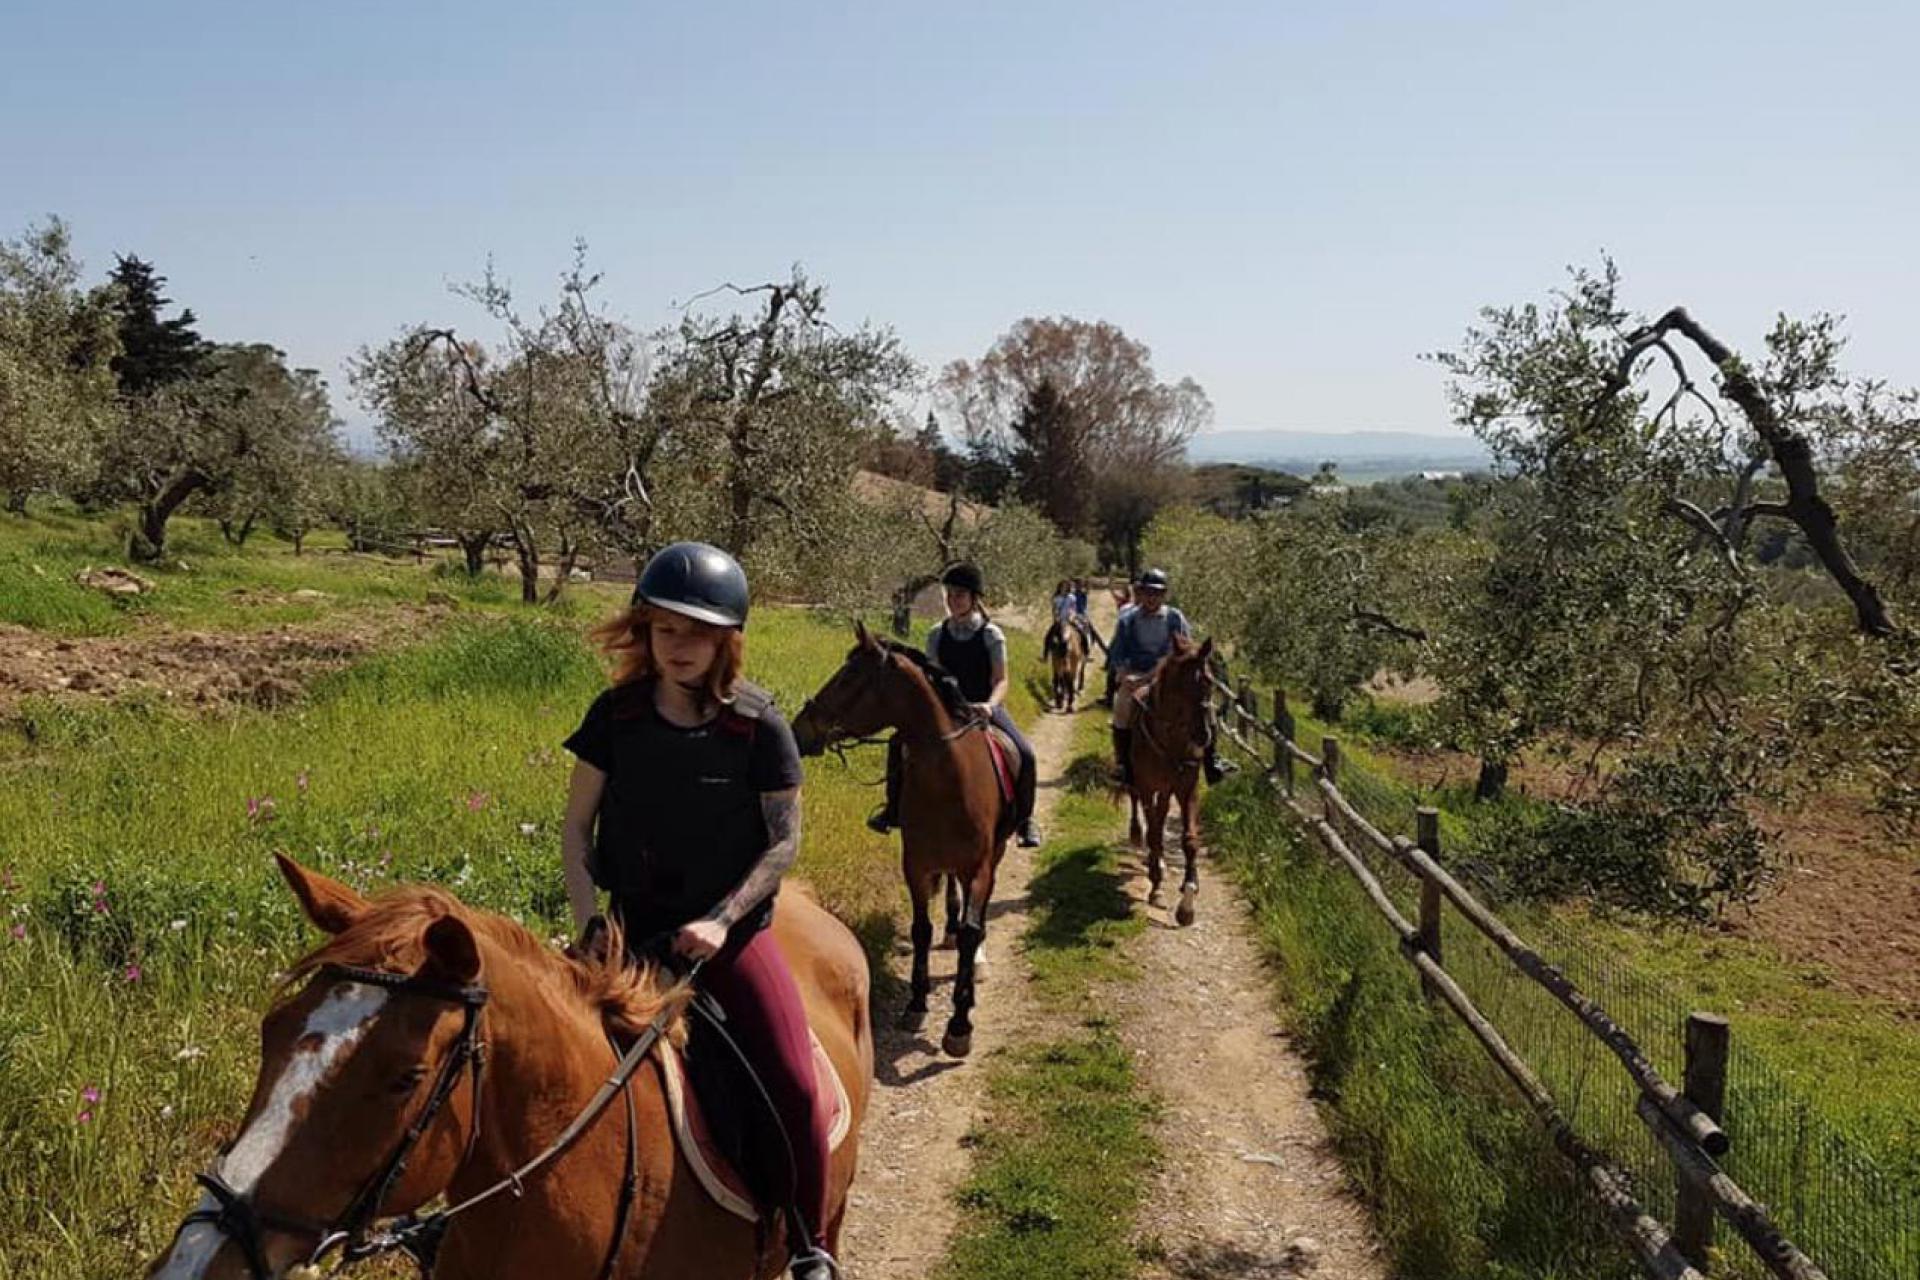 Agriturismo with riding school near the sea